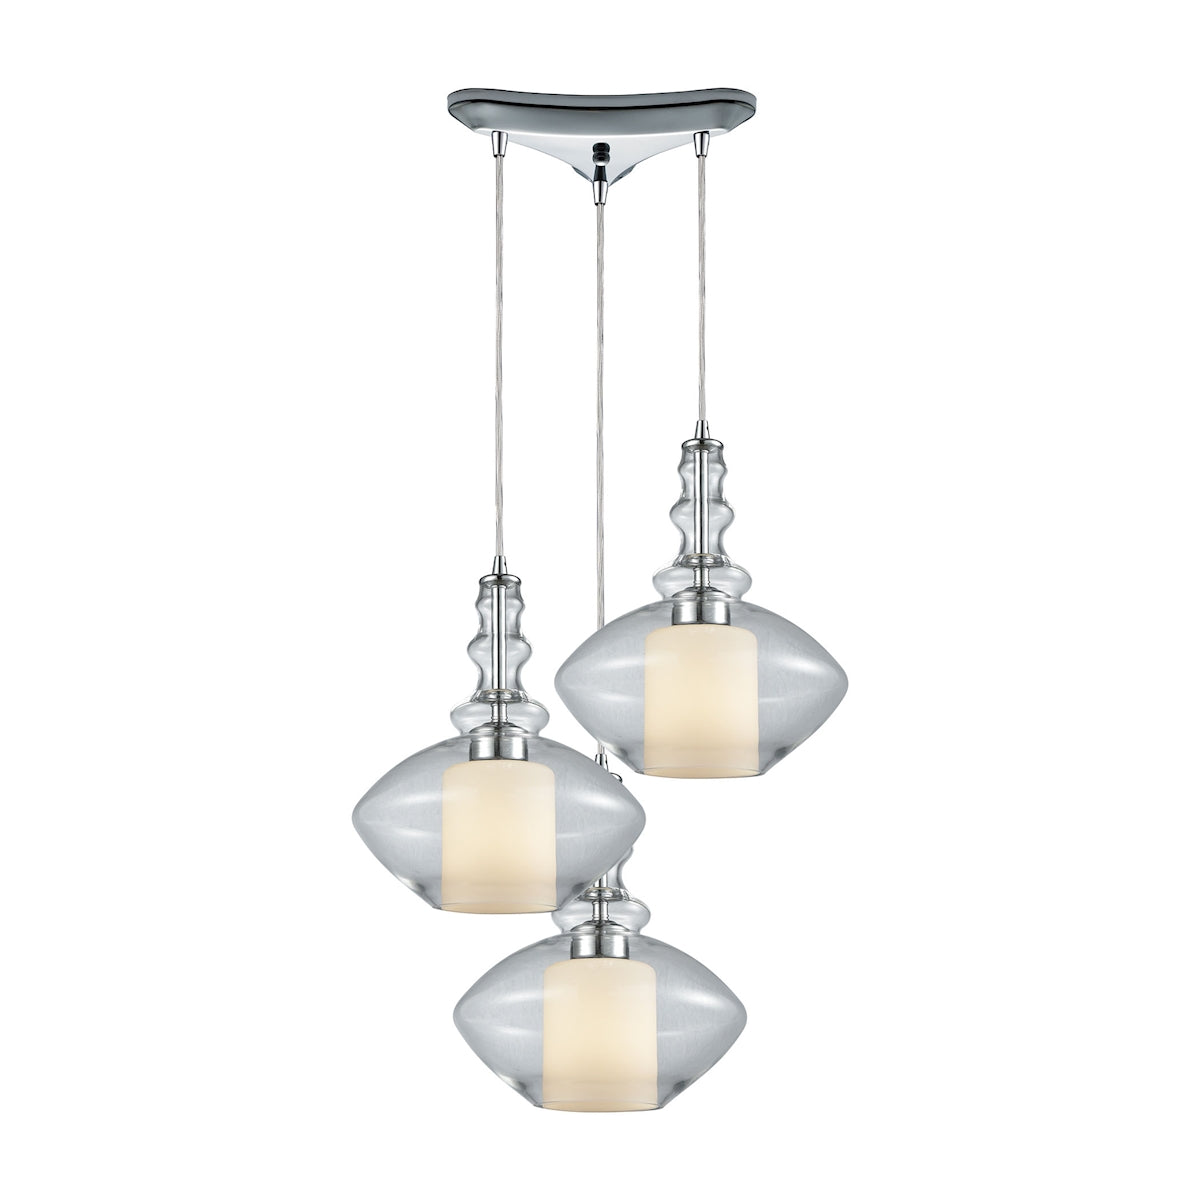 ELK Lighting 56500/3 Alora 3-Light Triangular Pendant Fixture in Chrome with Clear and Opal White Glass